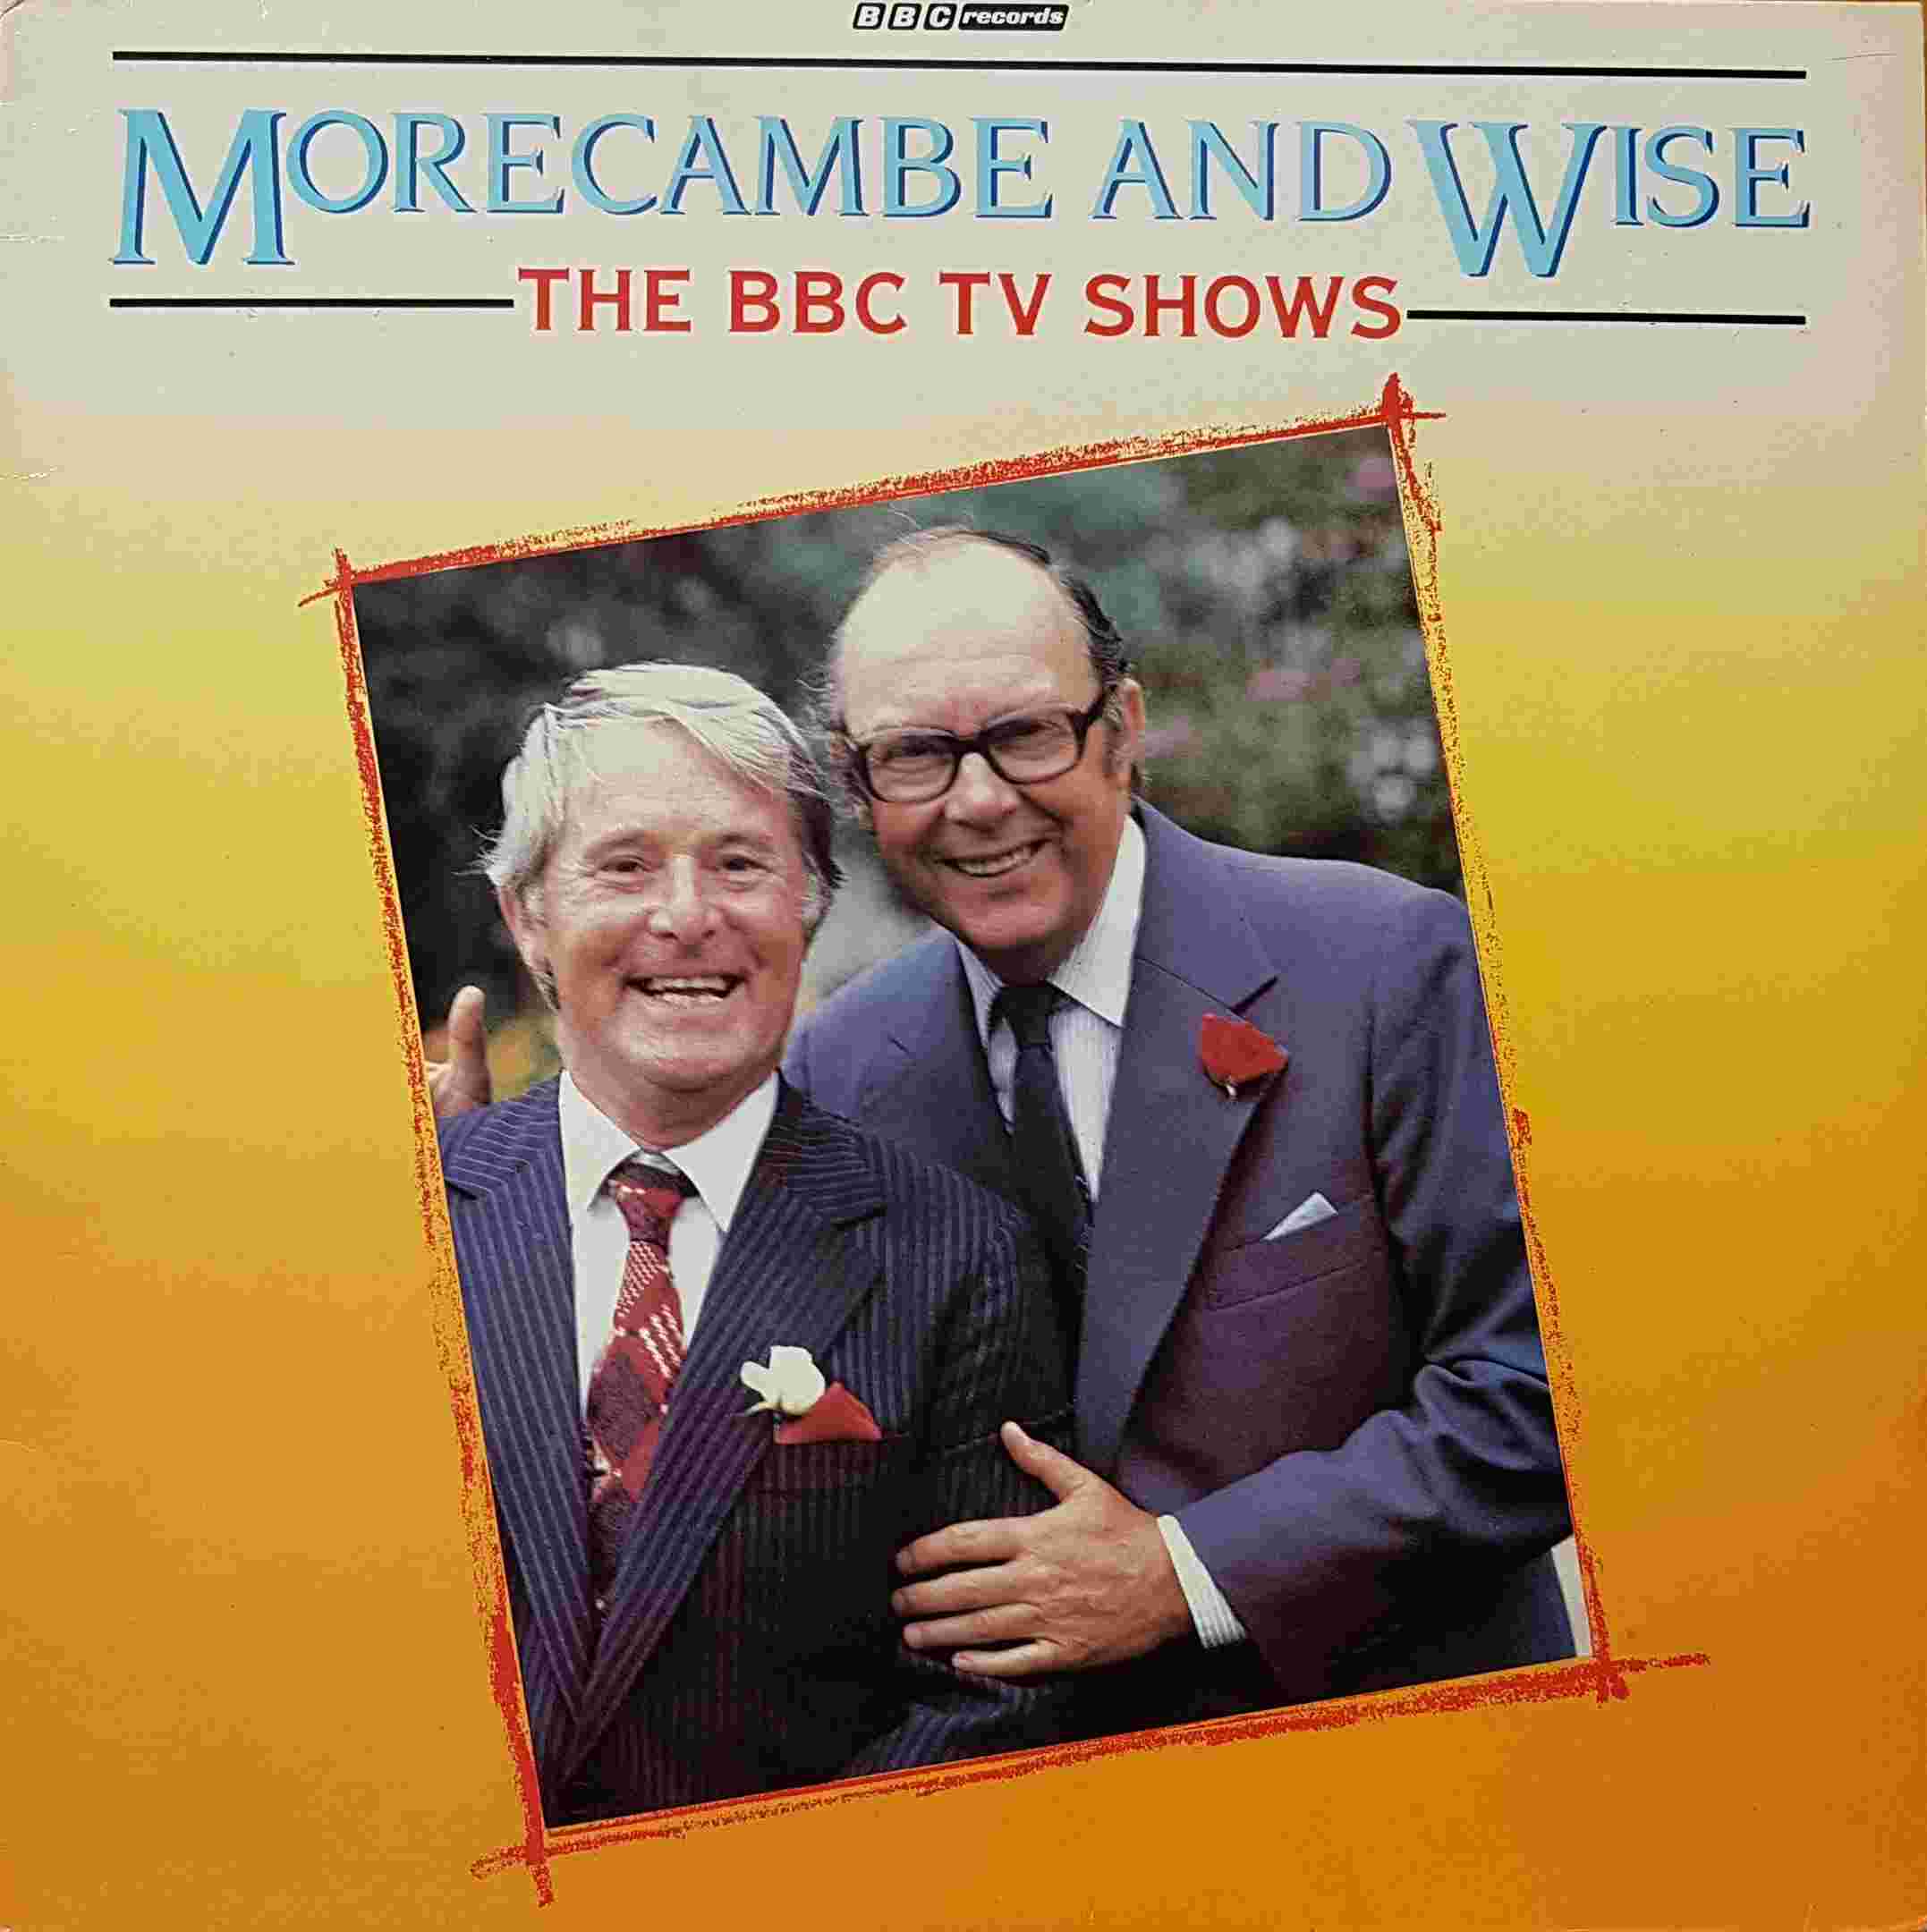 Picture of REC 534 Morecambe and Wise - The TV shows by artist Morecambe / Wise from the BBC albums - Records and Tapes library